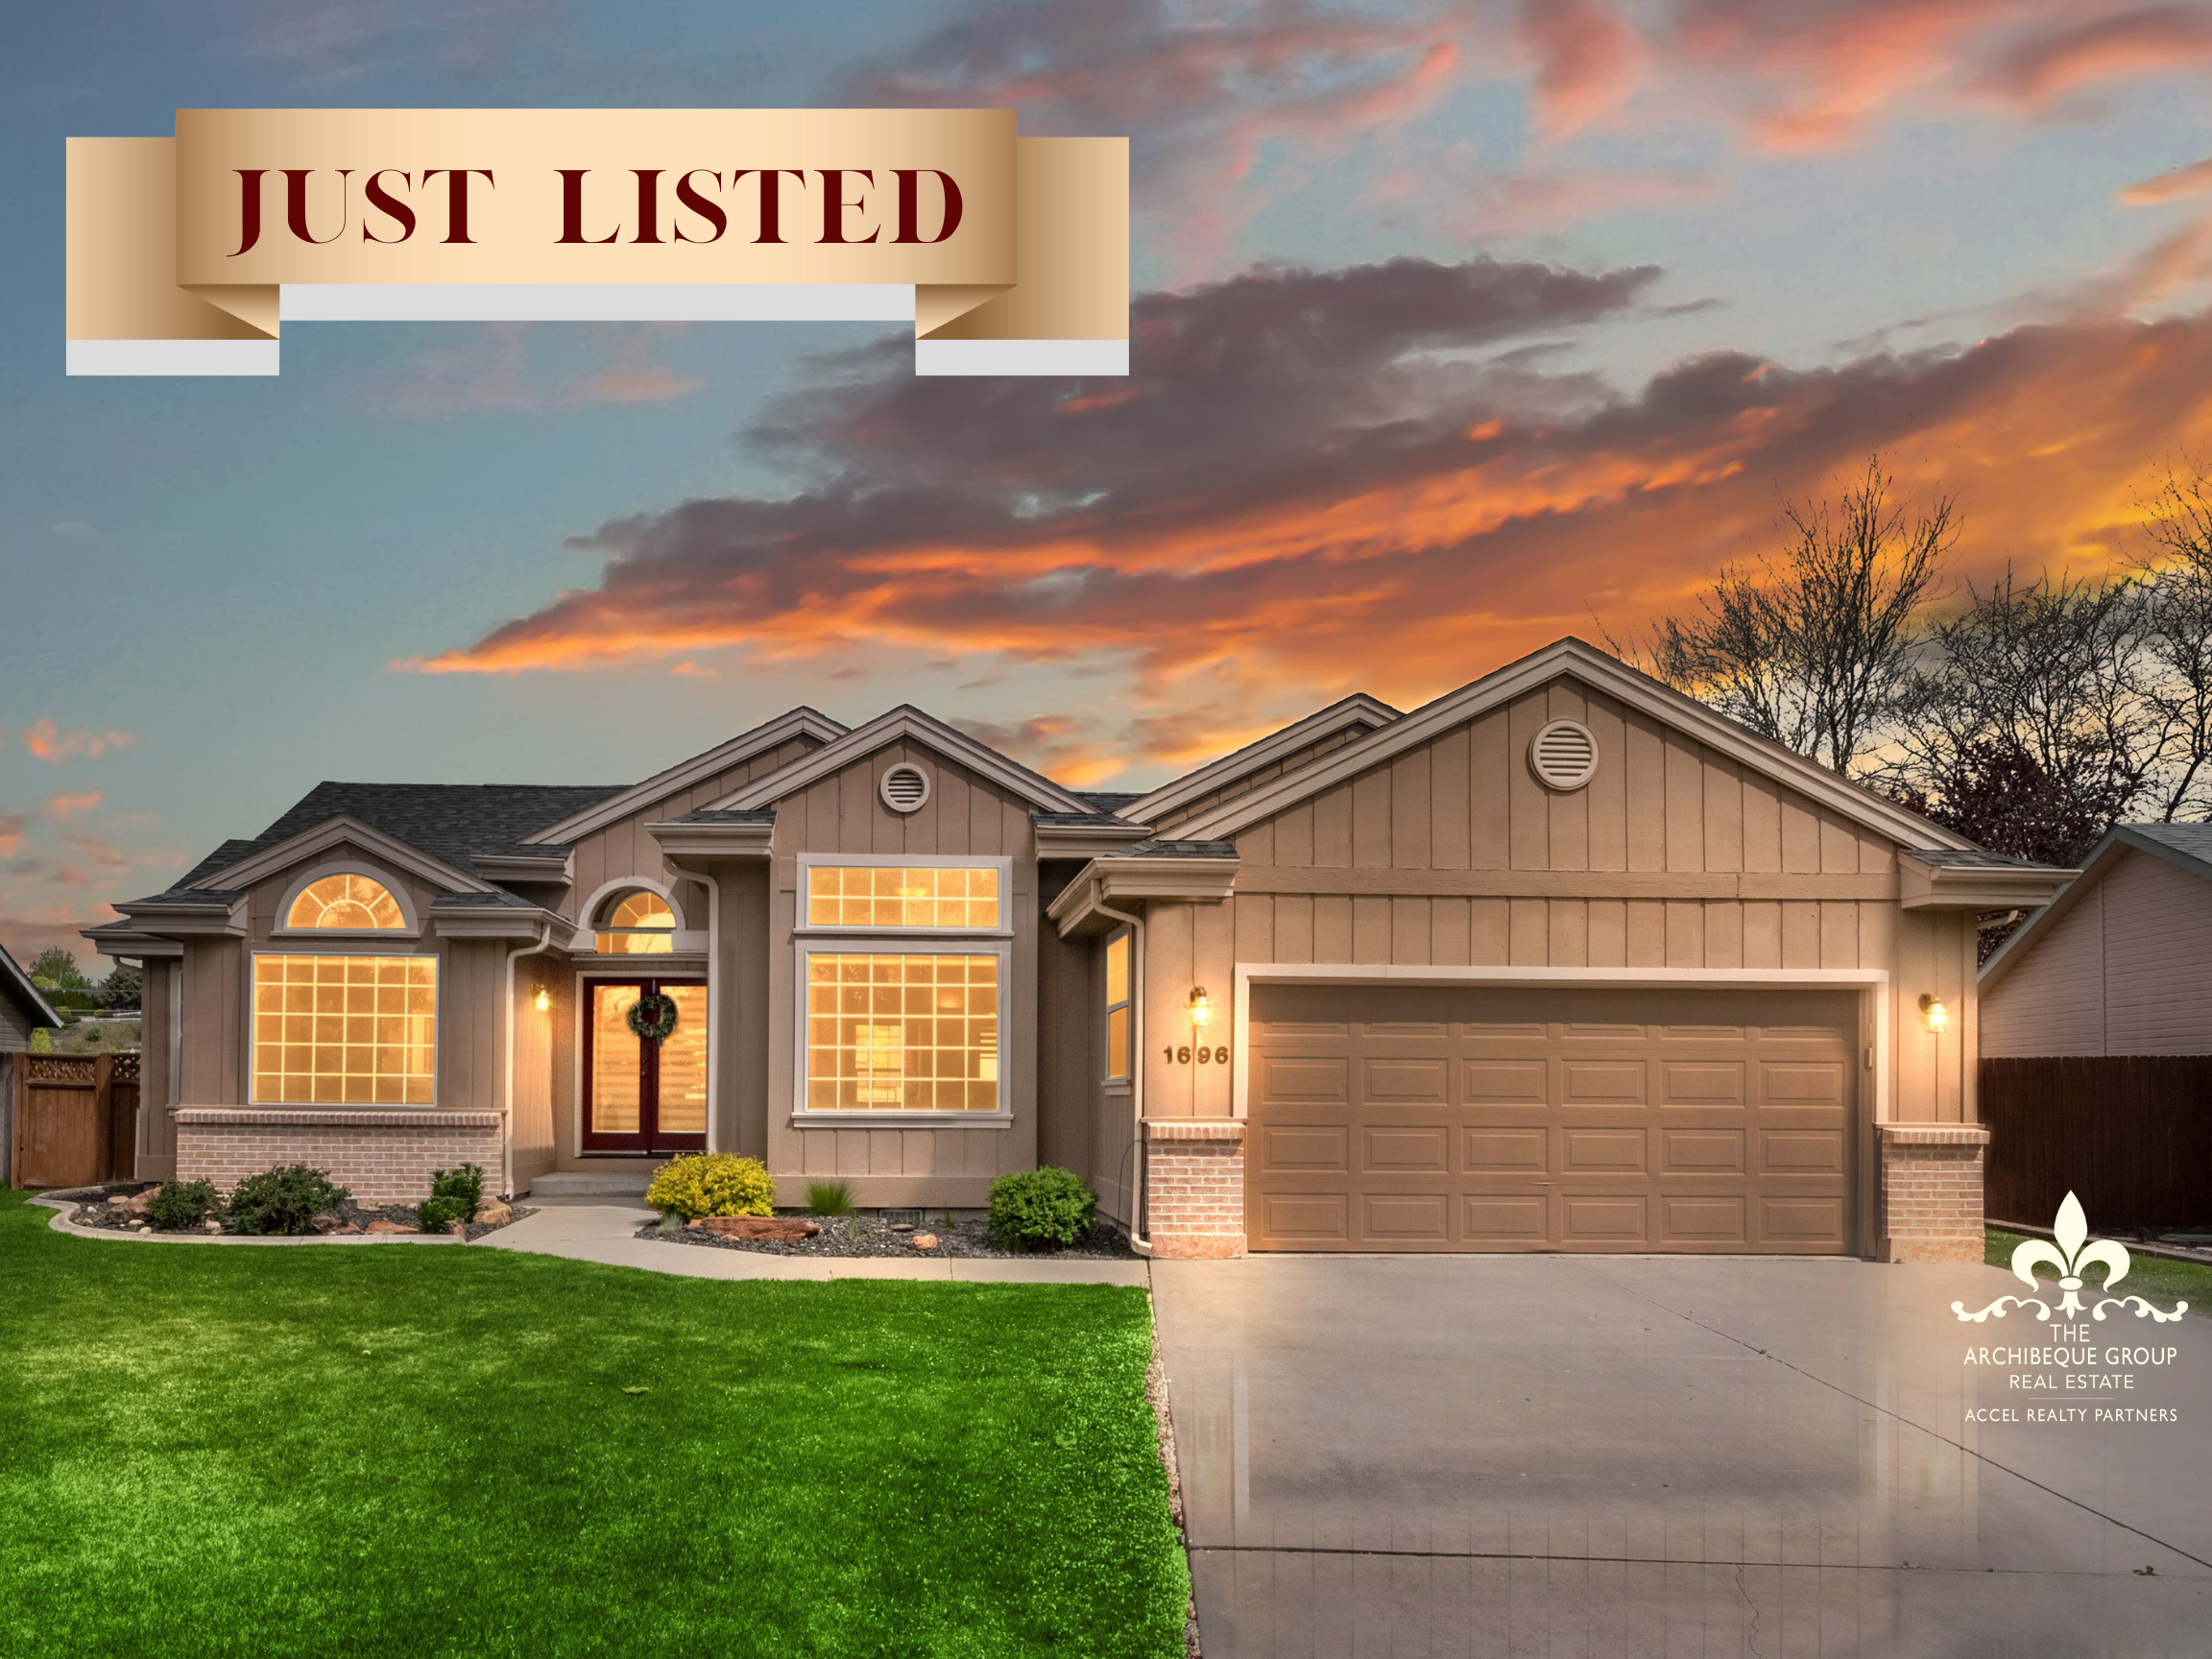 Great Eagle Idaho Home for Sale! Just Listed!